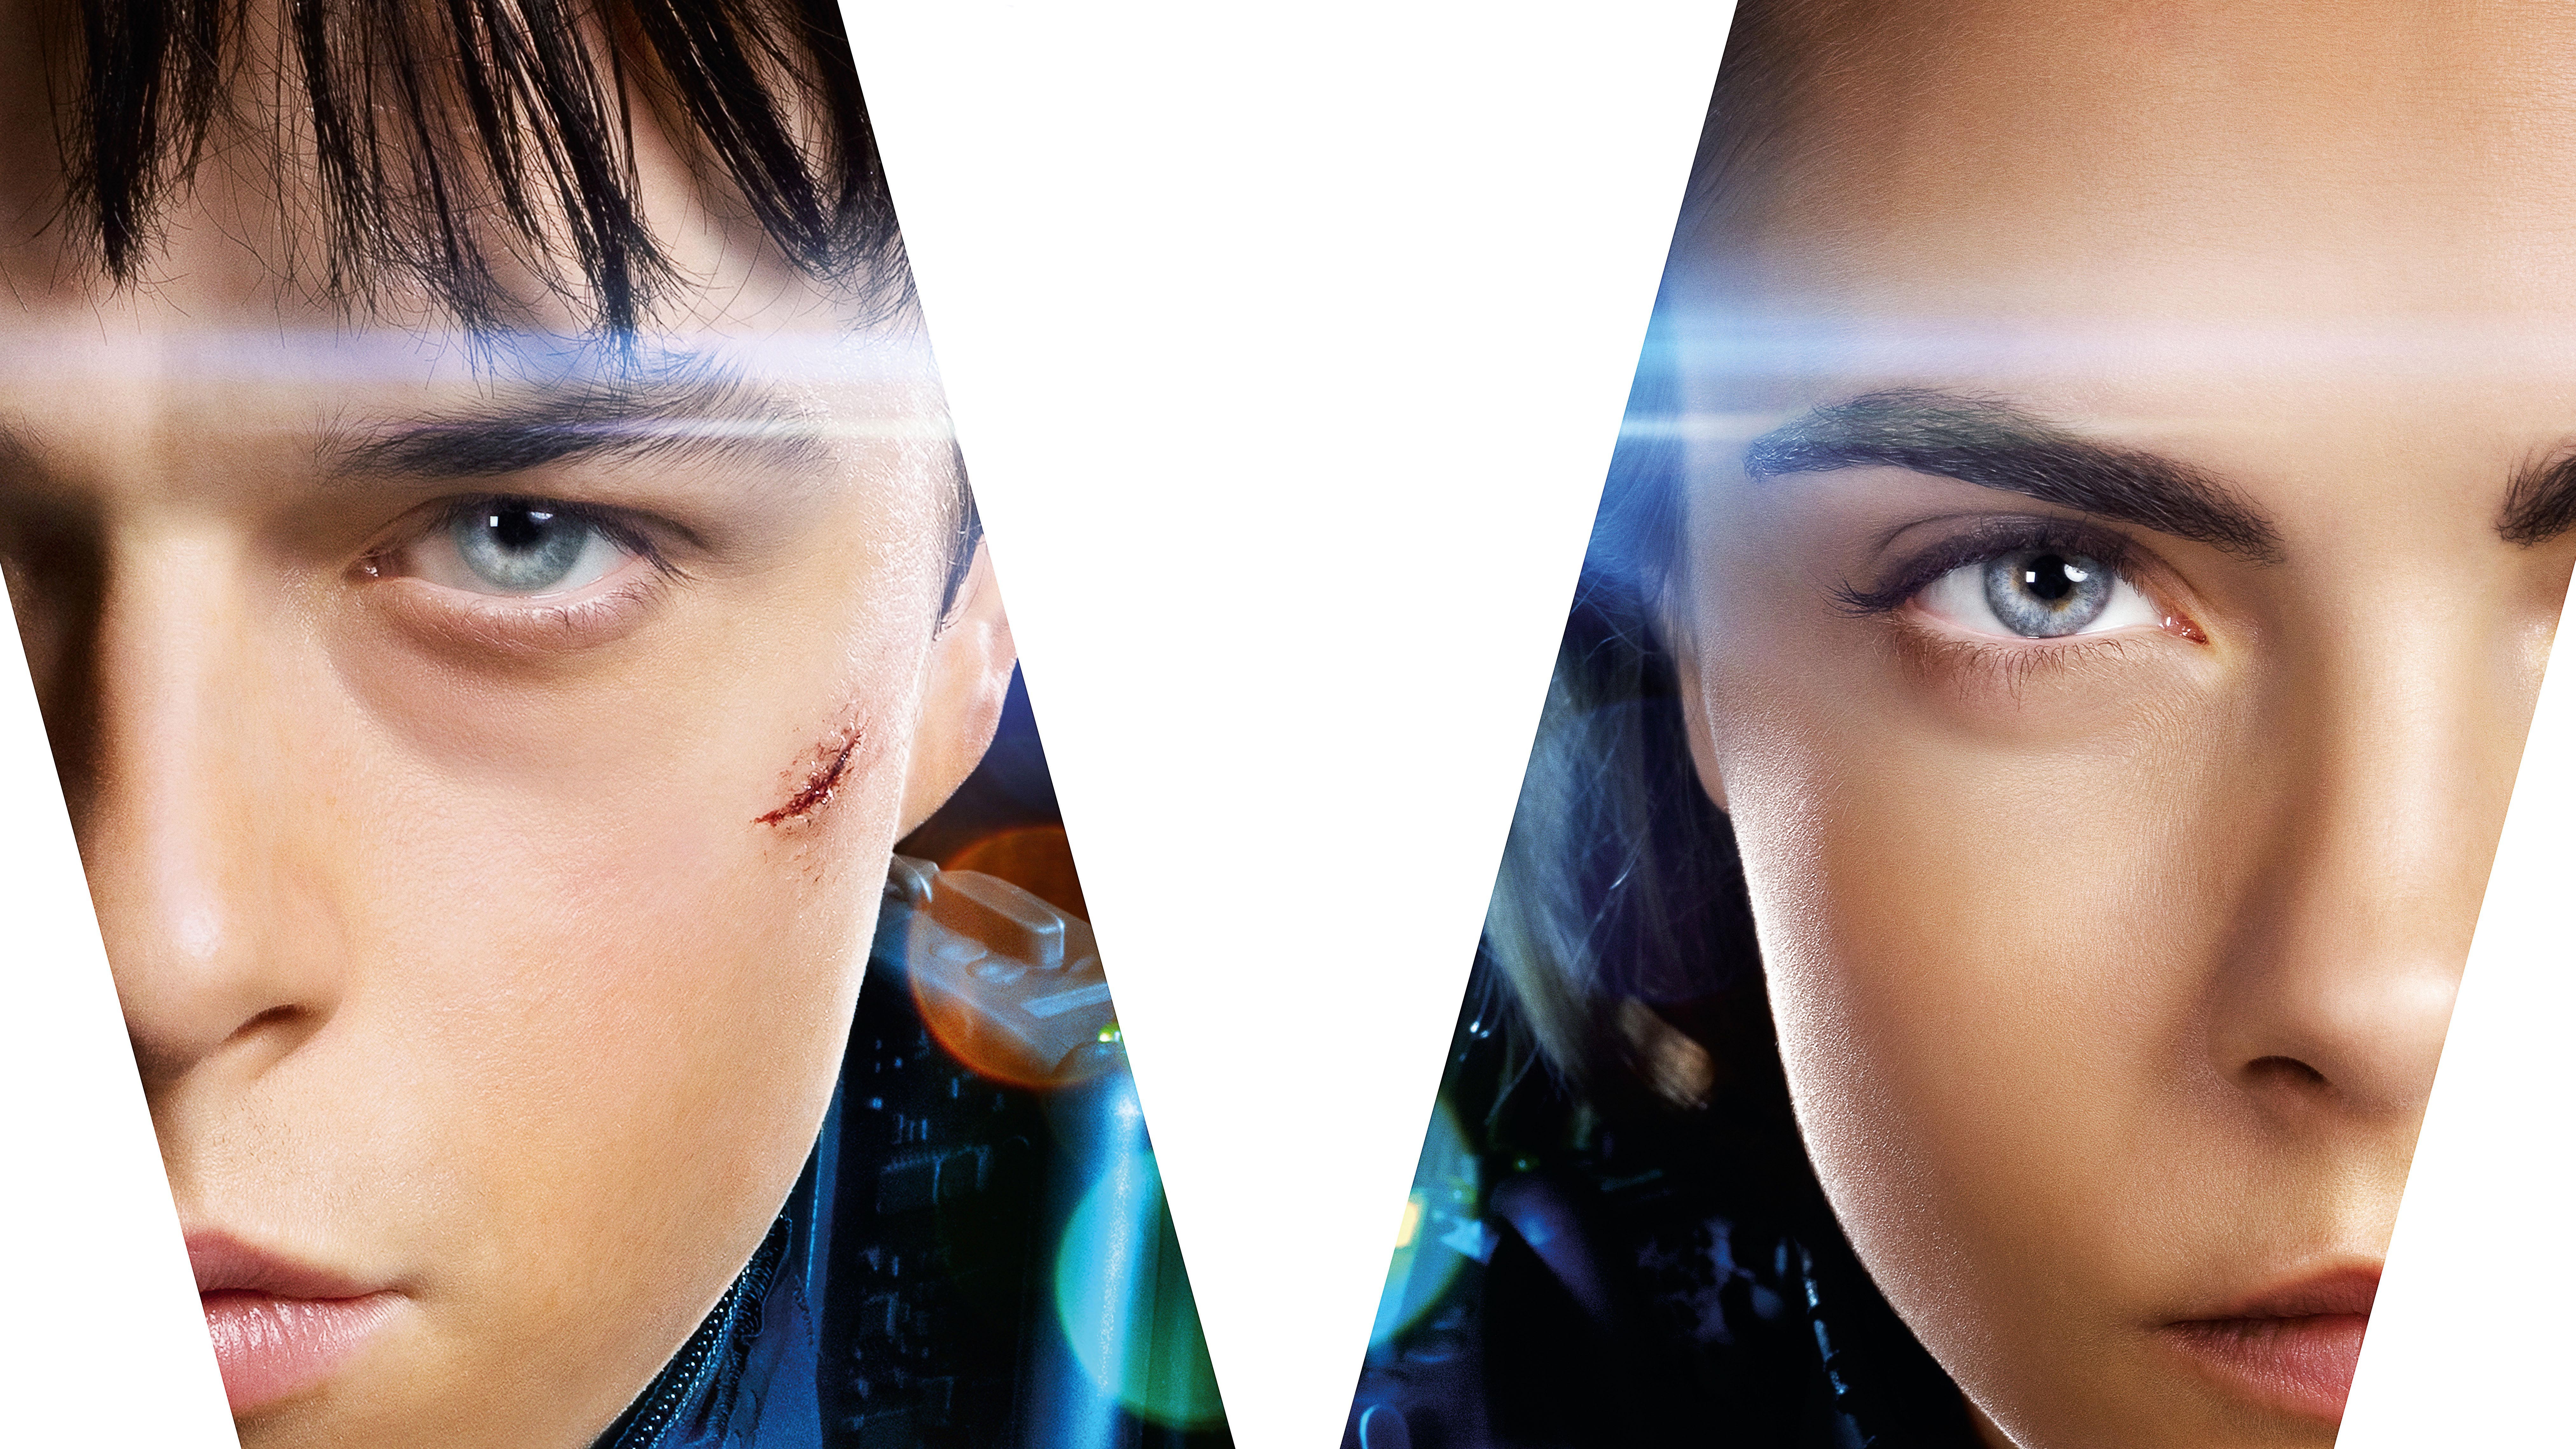 Valerian And The City Of A Thousand Planets Cara Delevingne Dane DeHaan 8100x4556